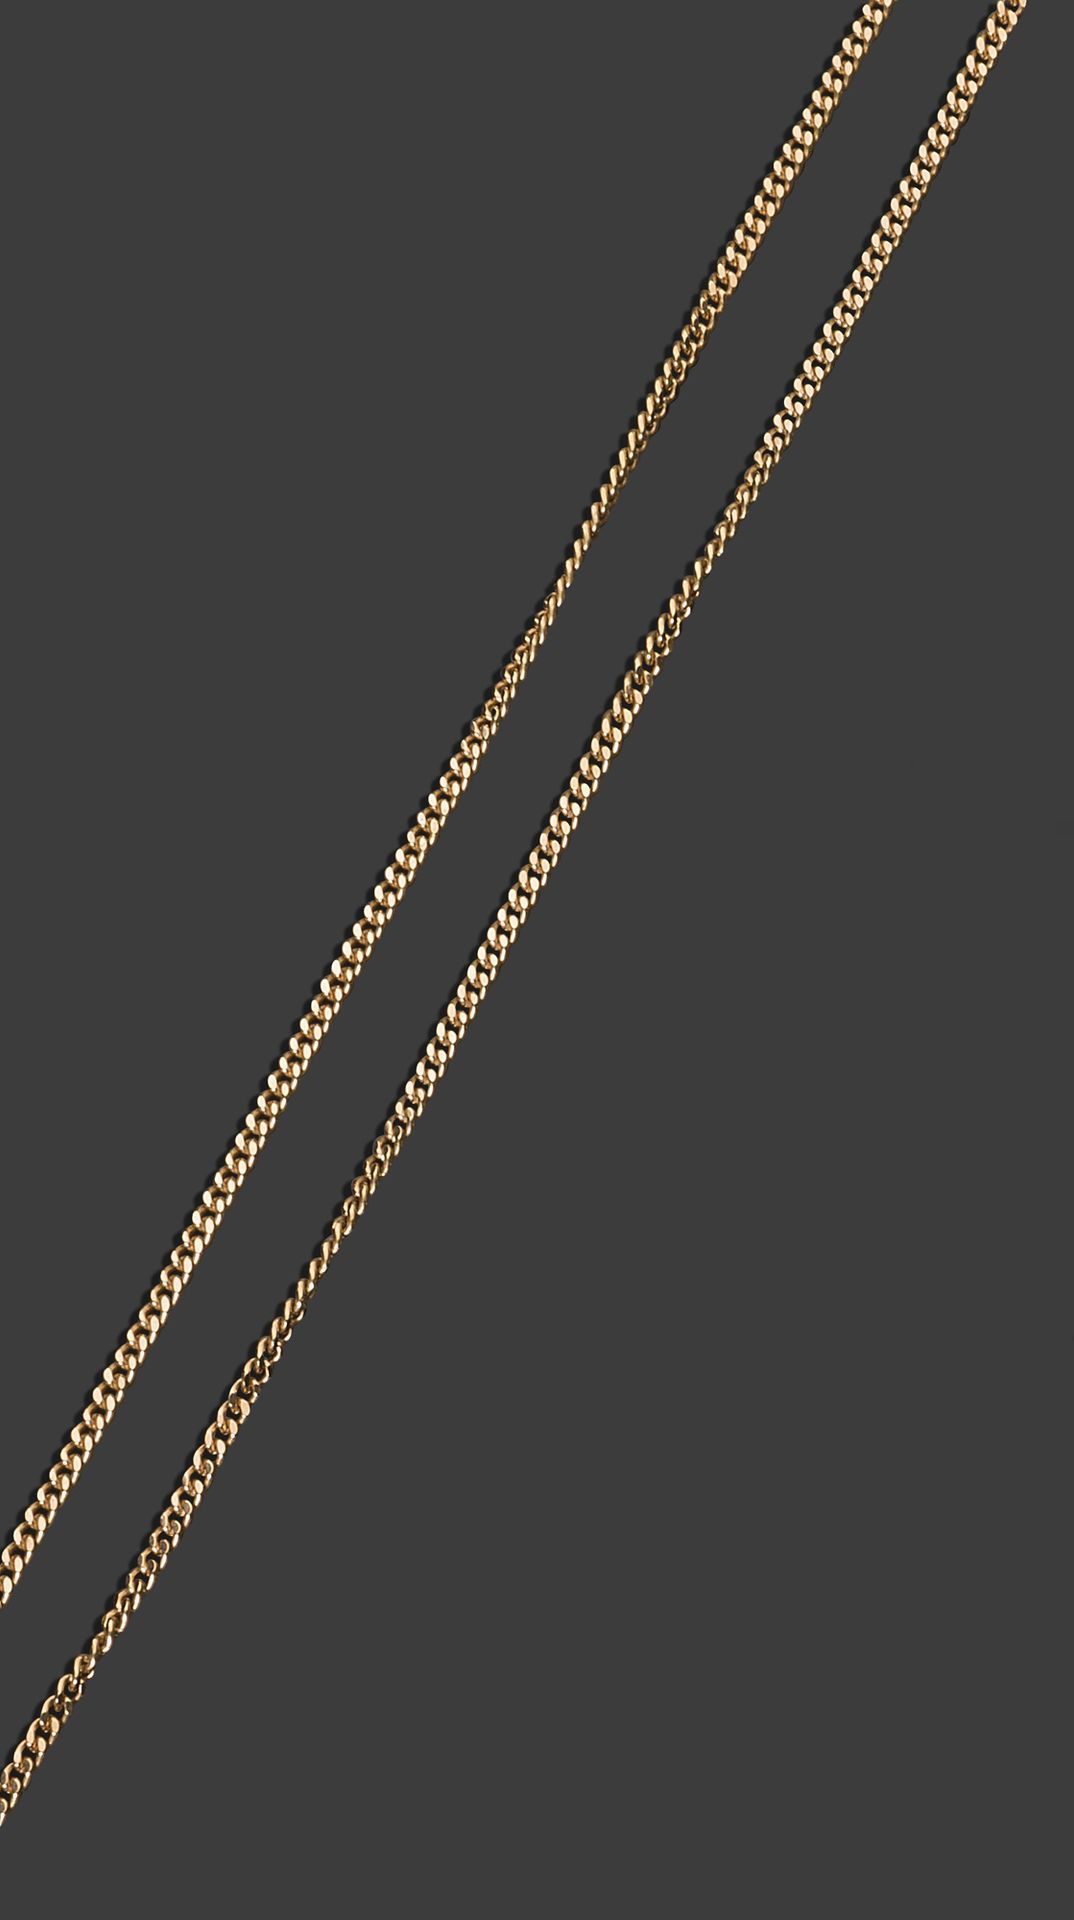 Null Yellow gold chain (18K), flat link

Lg 80 cm

Weight 20.98 g